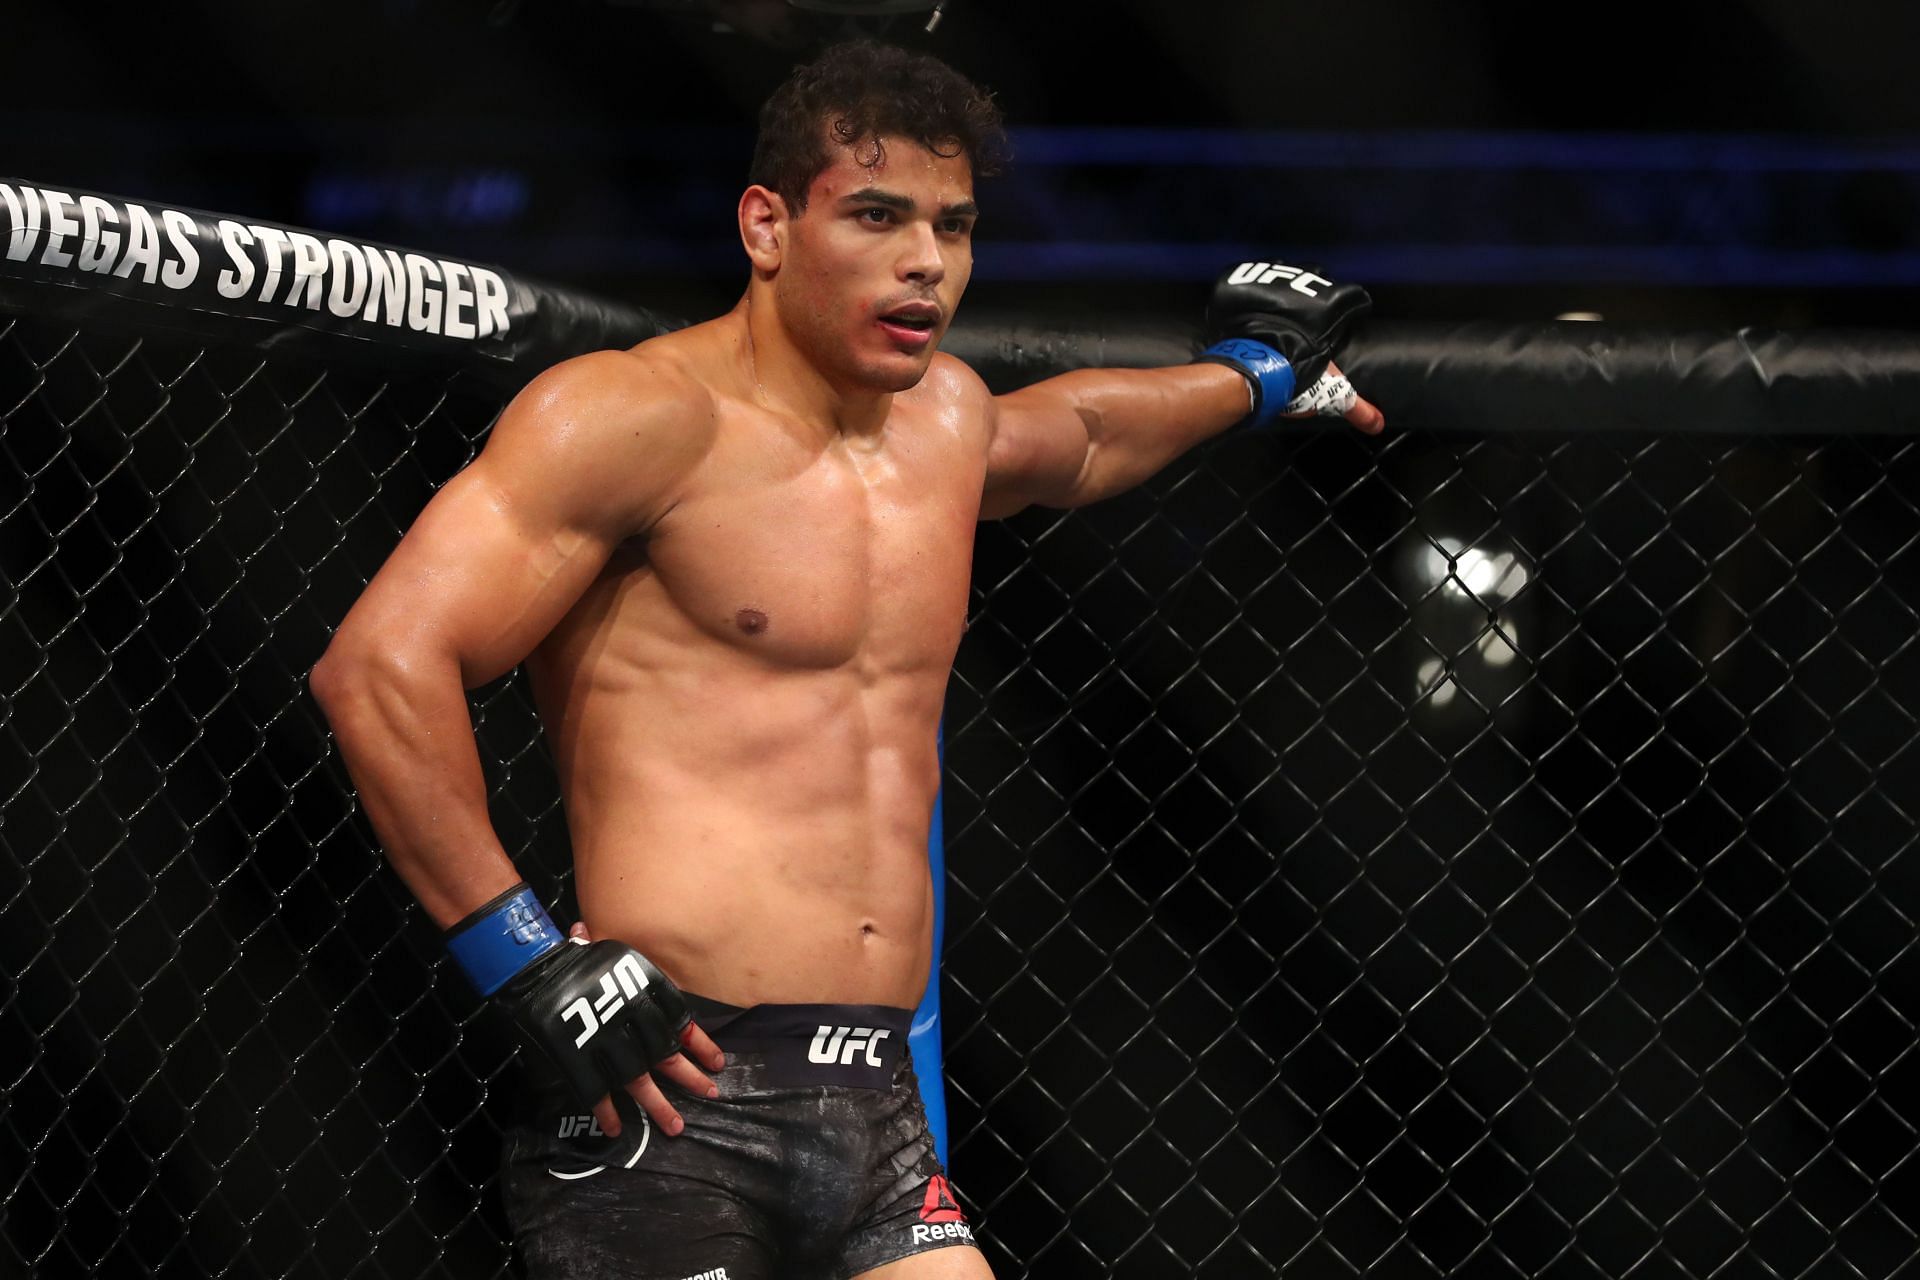 Paulo Costa (above) at UFC 241 Cormier v Miocic 2